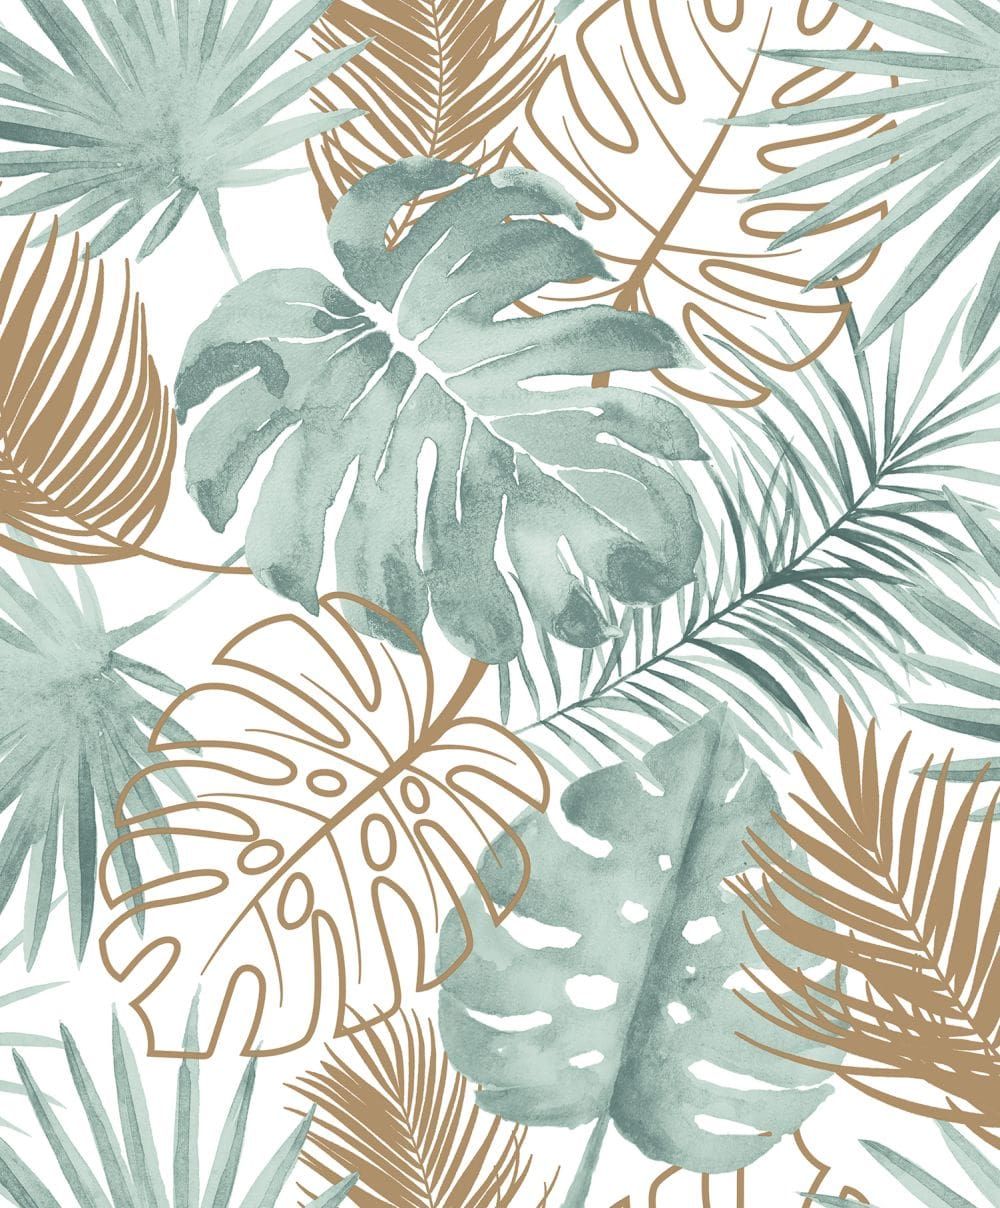 Aesthetic Tropical Wallpapers